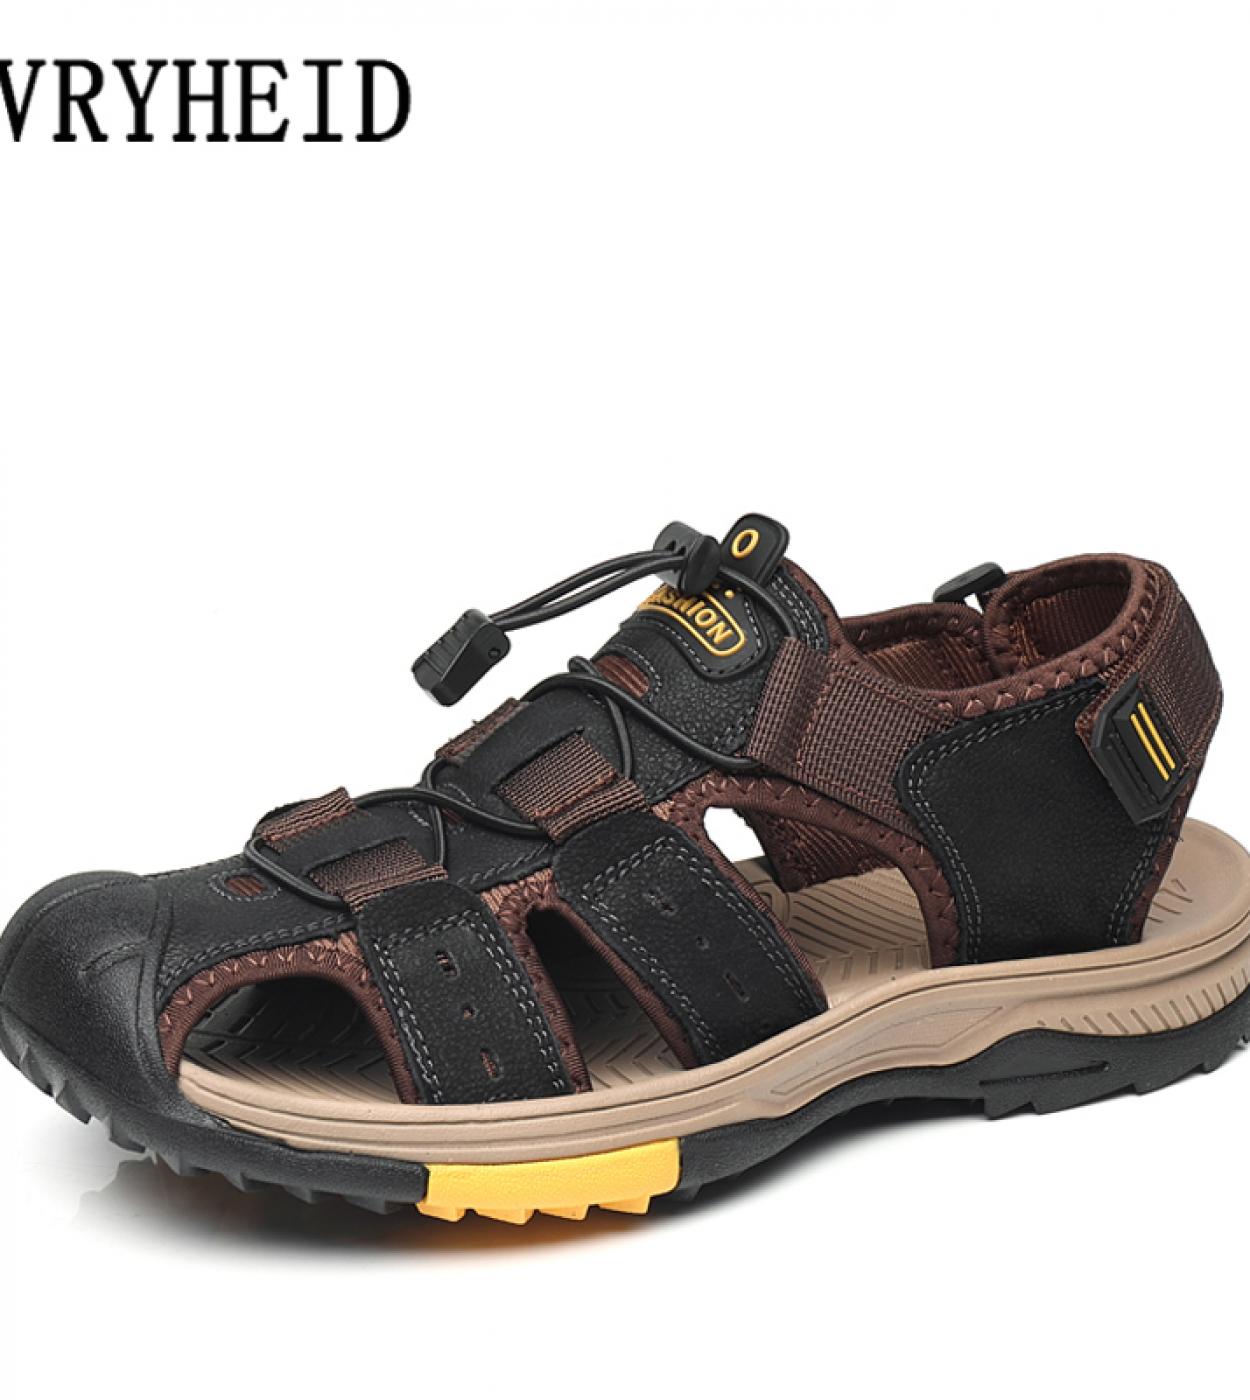 Vryheid Summer New Mens Sandals Genuine Leather Gladiator Beach Wading Shoes Soft Comfortable Outdoors Sport Casual Hik